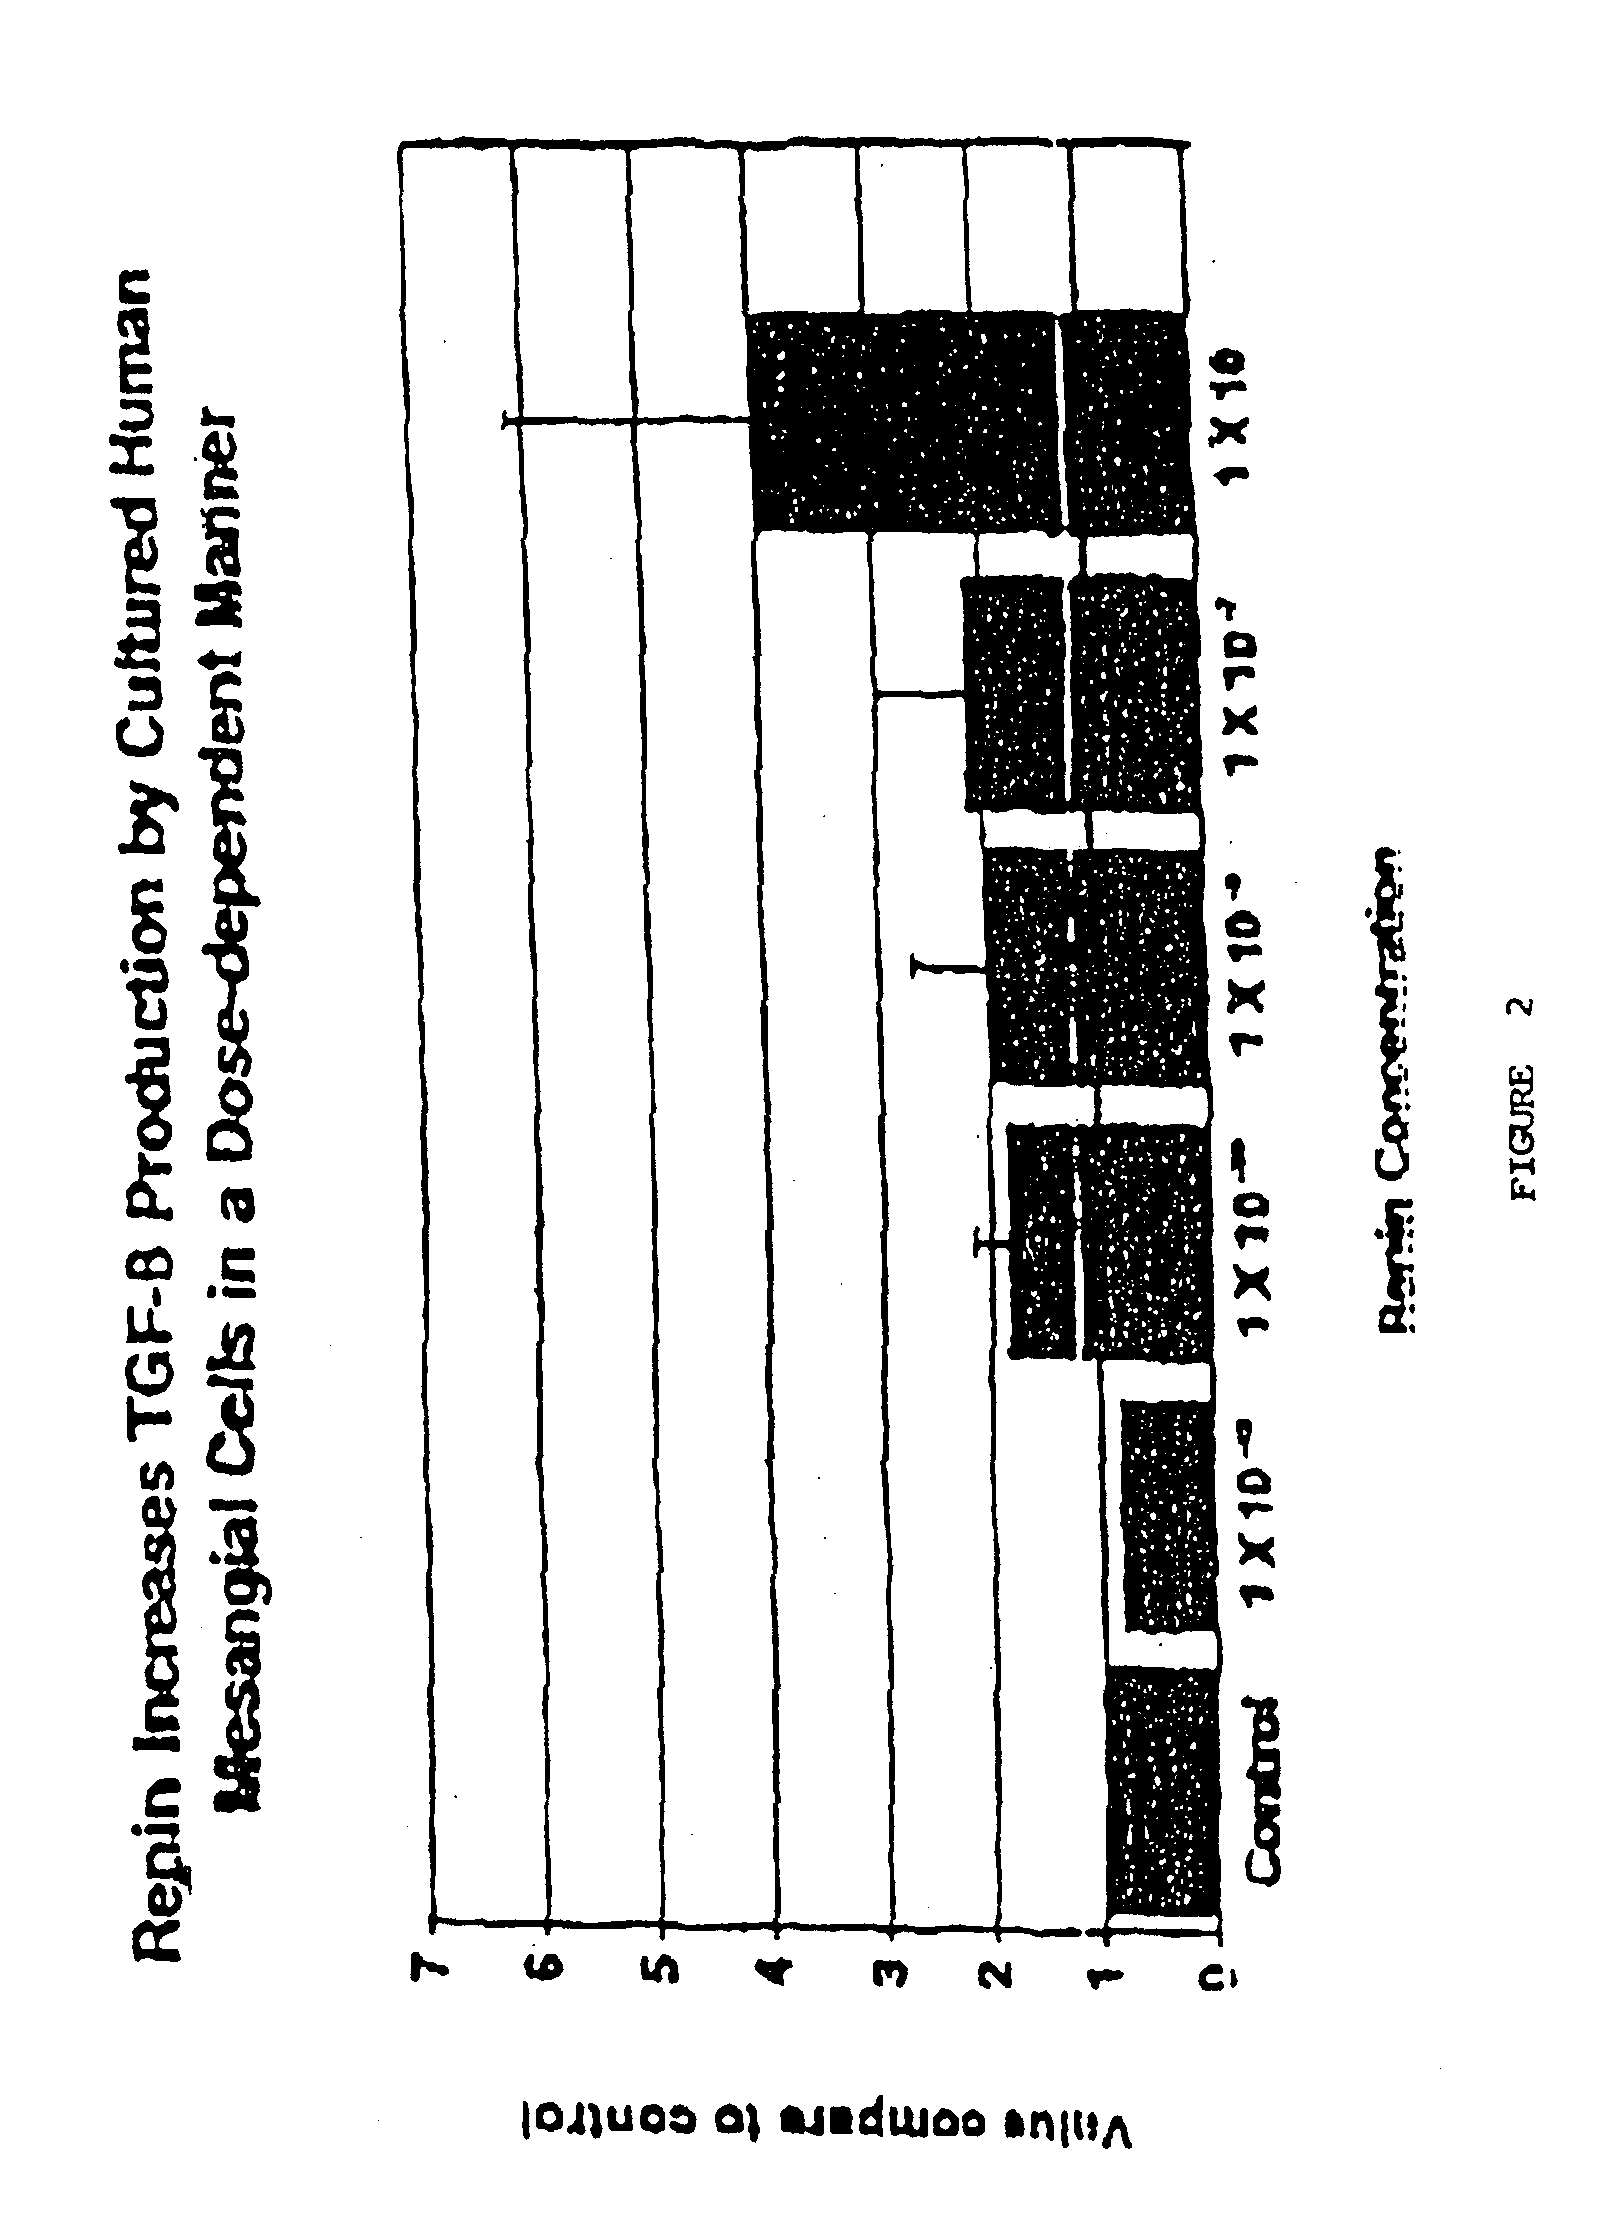 Methods for treating conditions associated with the accumulation of excess extracellular matrix